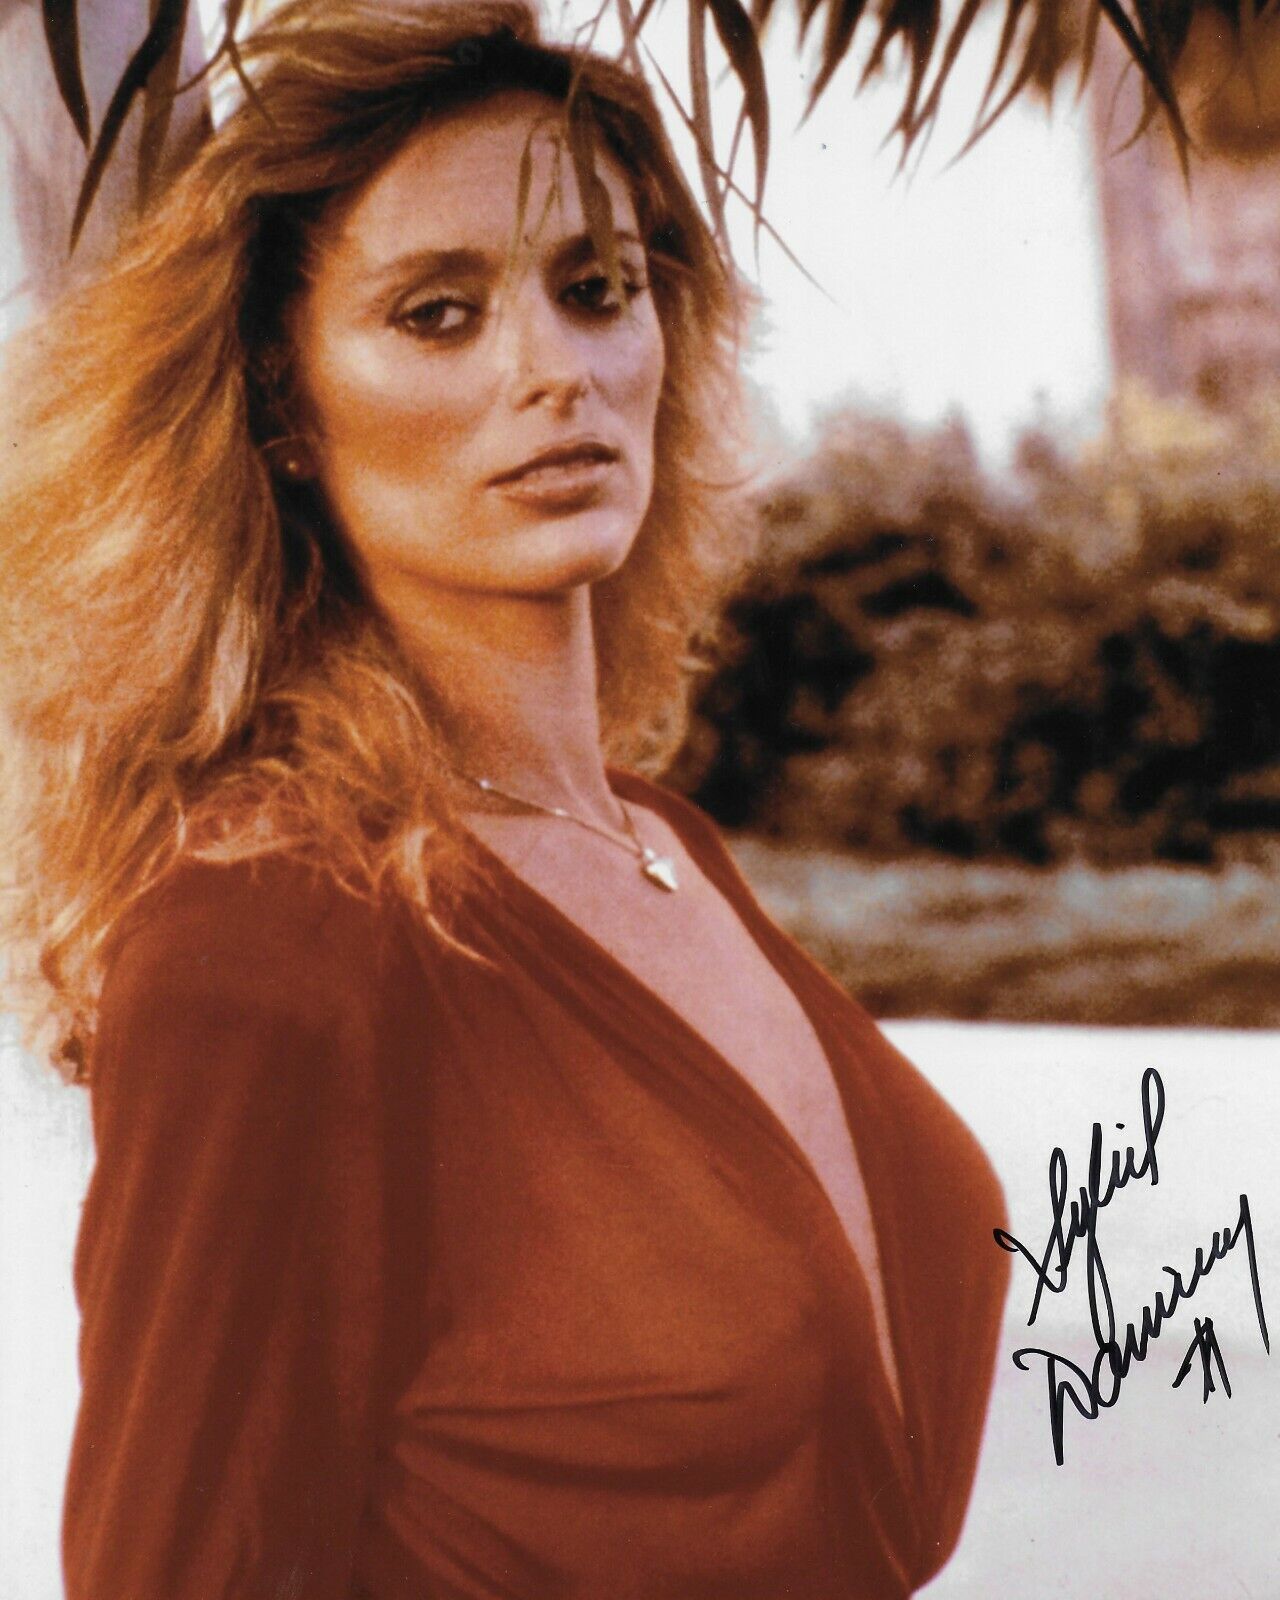 Sybil Danning Signed 8x10 Photo Poster painting - 1970's / 1980's B Movie Actress - SEXY!!! #68